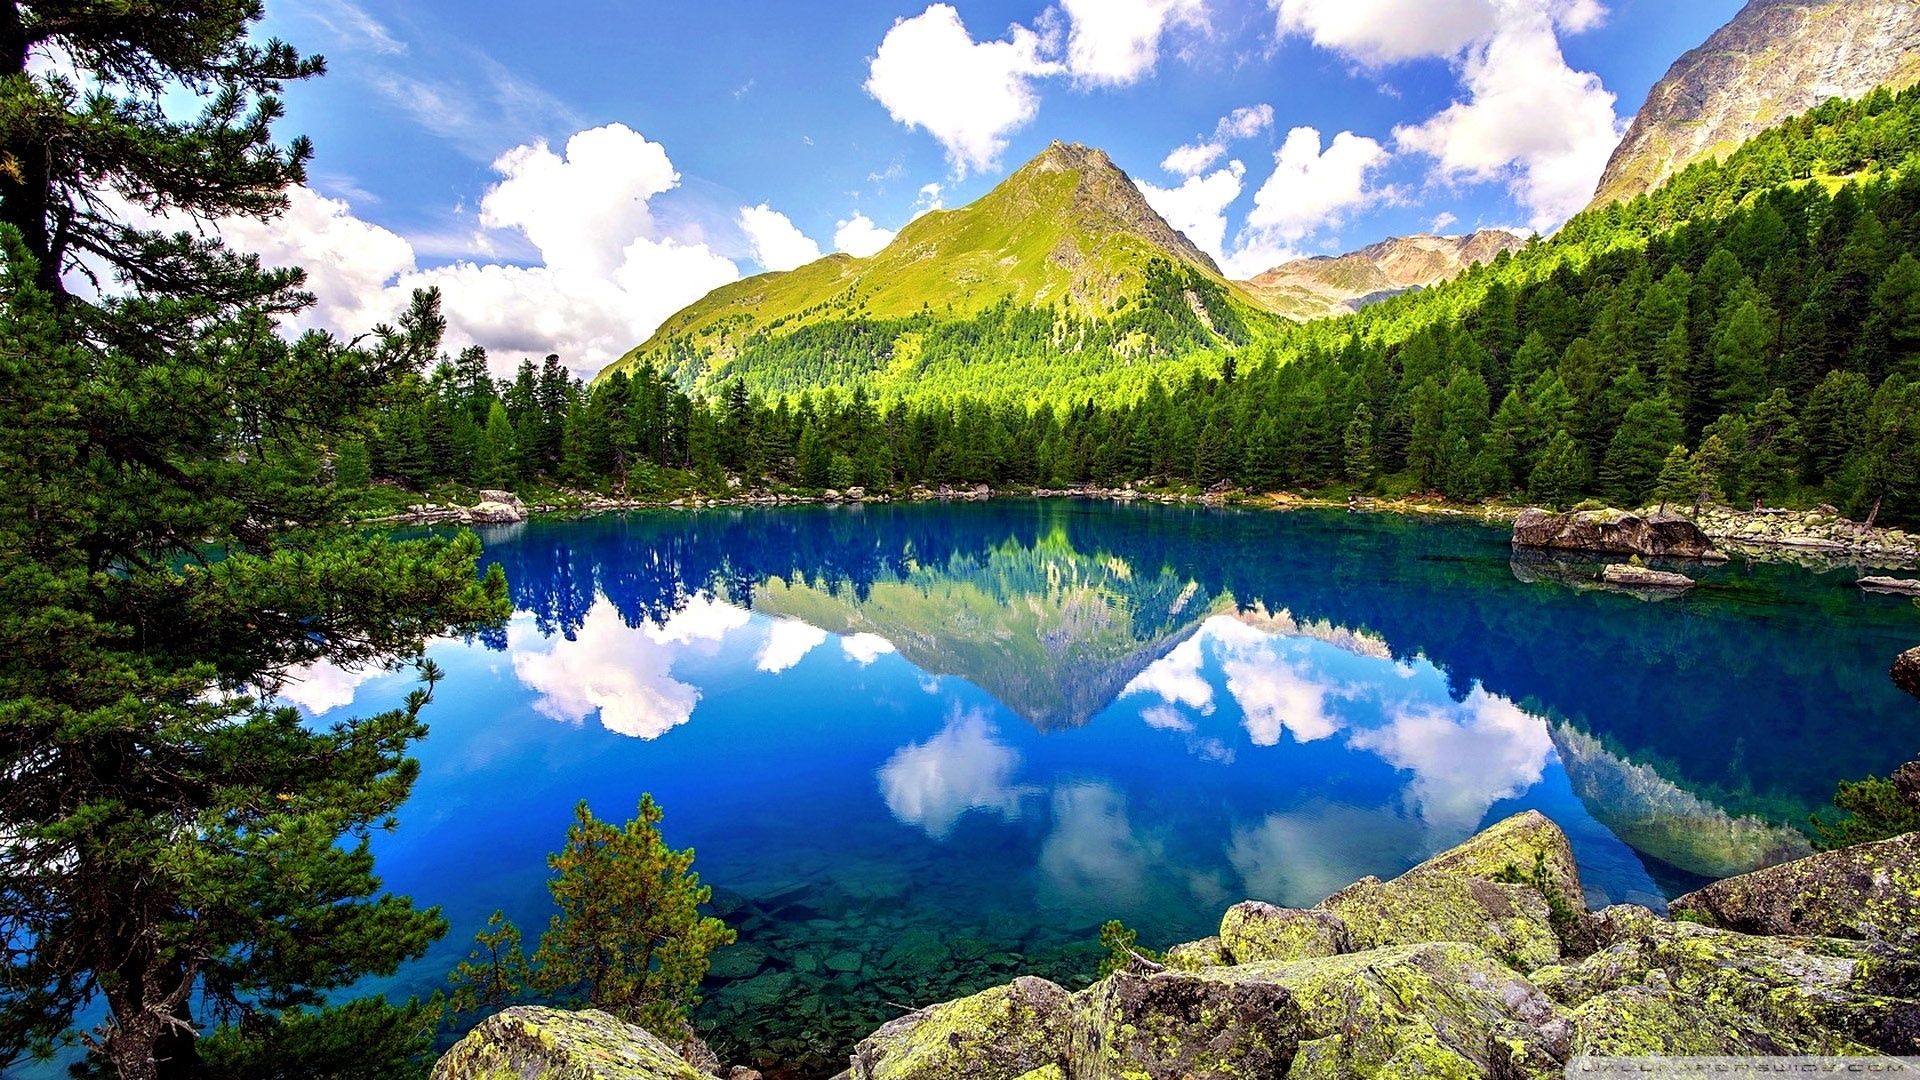 45 Springtime in the Mountains Wallpapers   Download at WallpaperBro 1920x1080